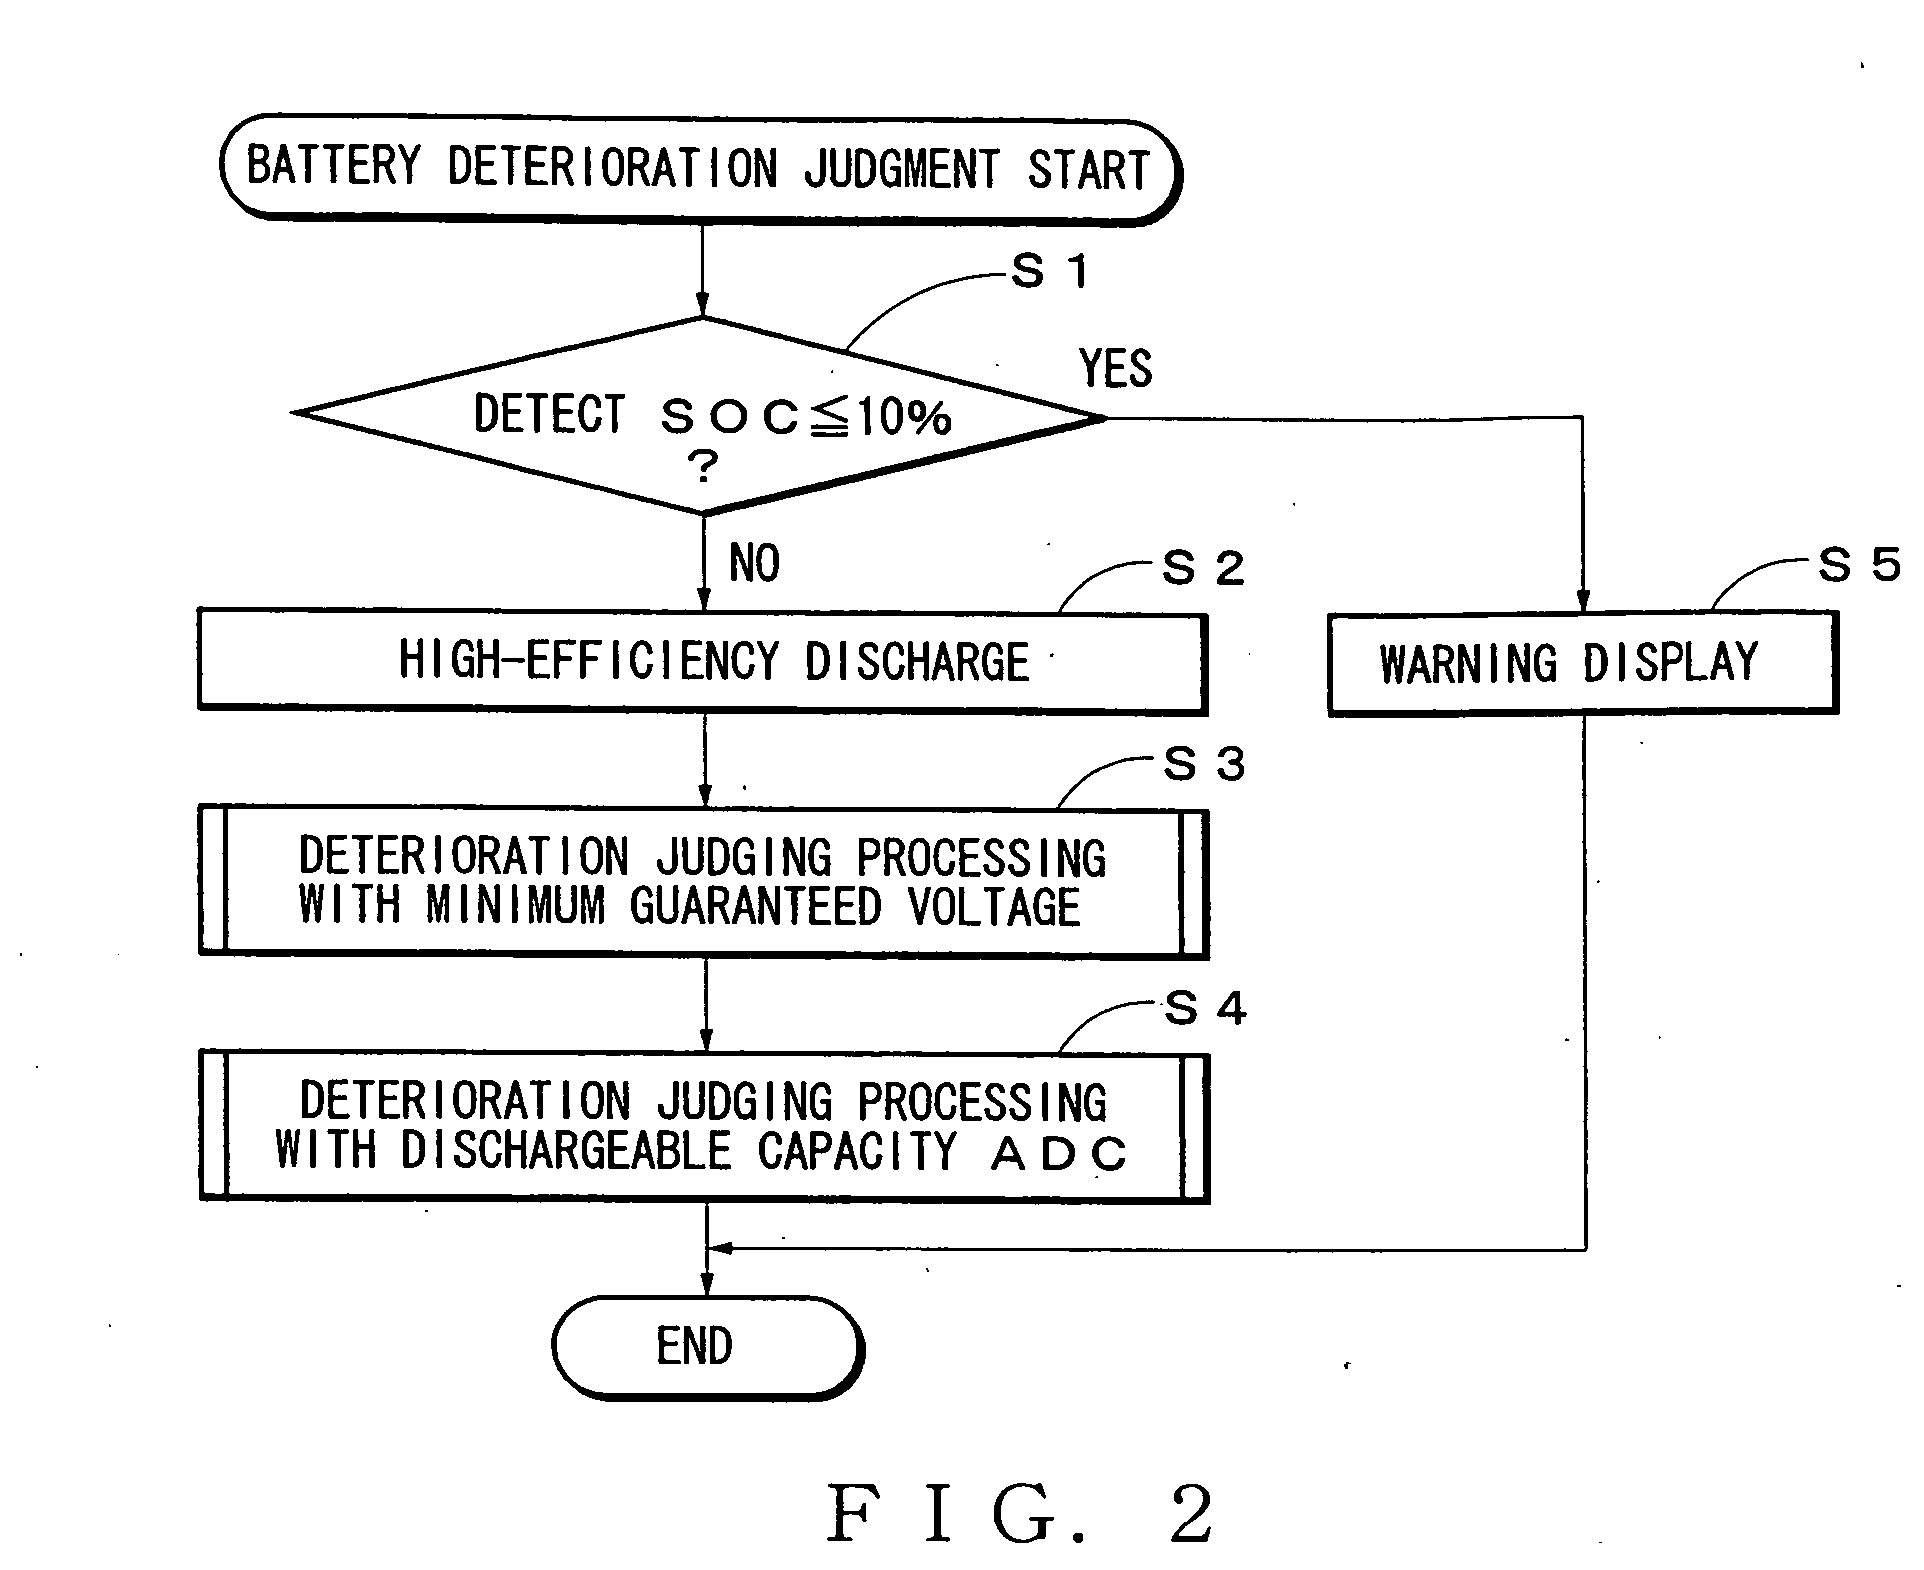 Method and apparatus for judging deterioration of battery